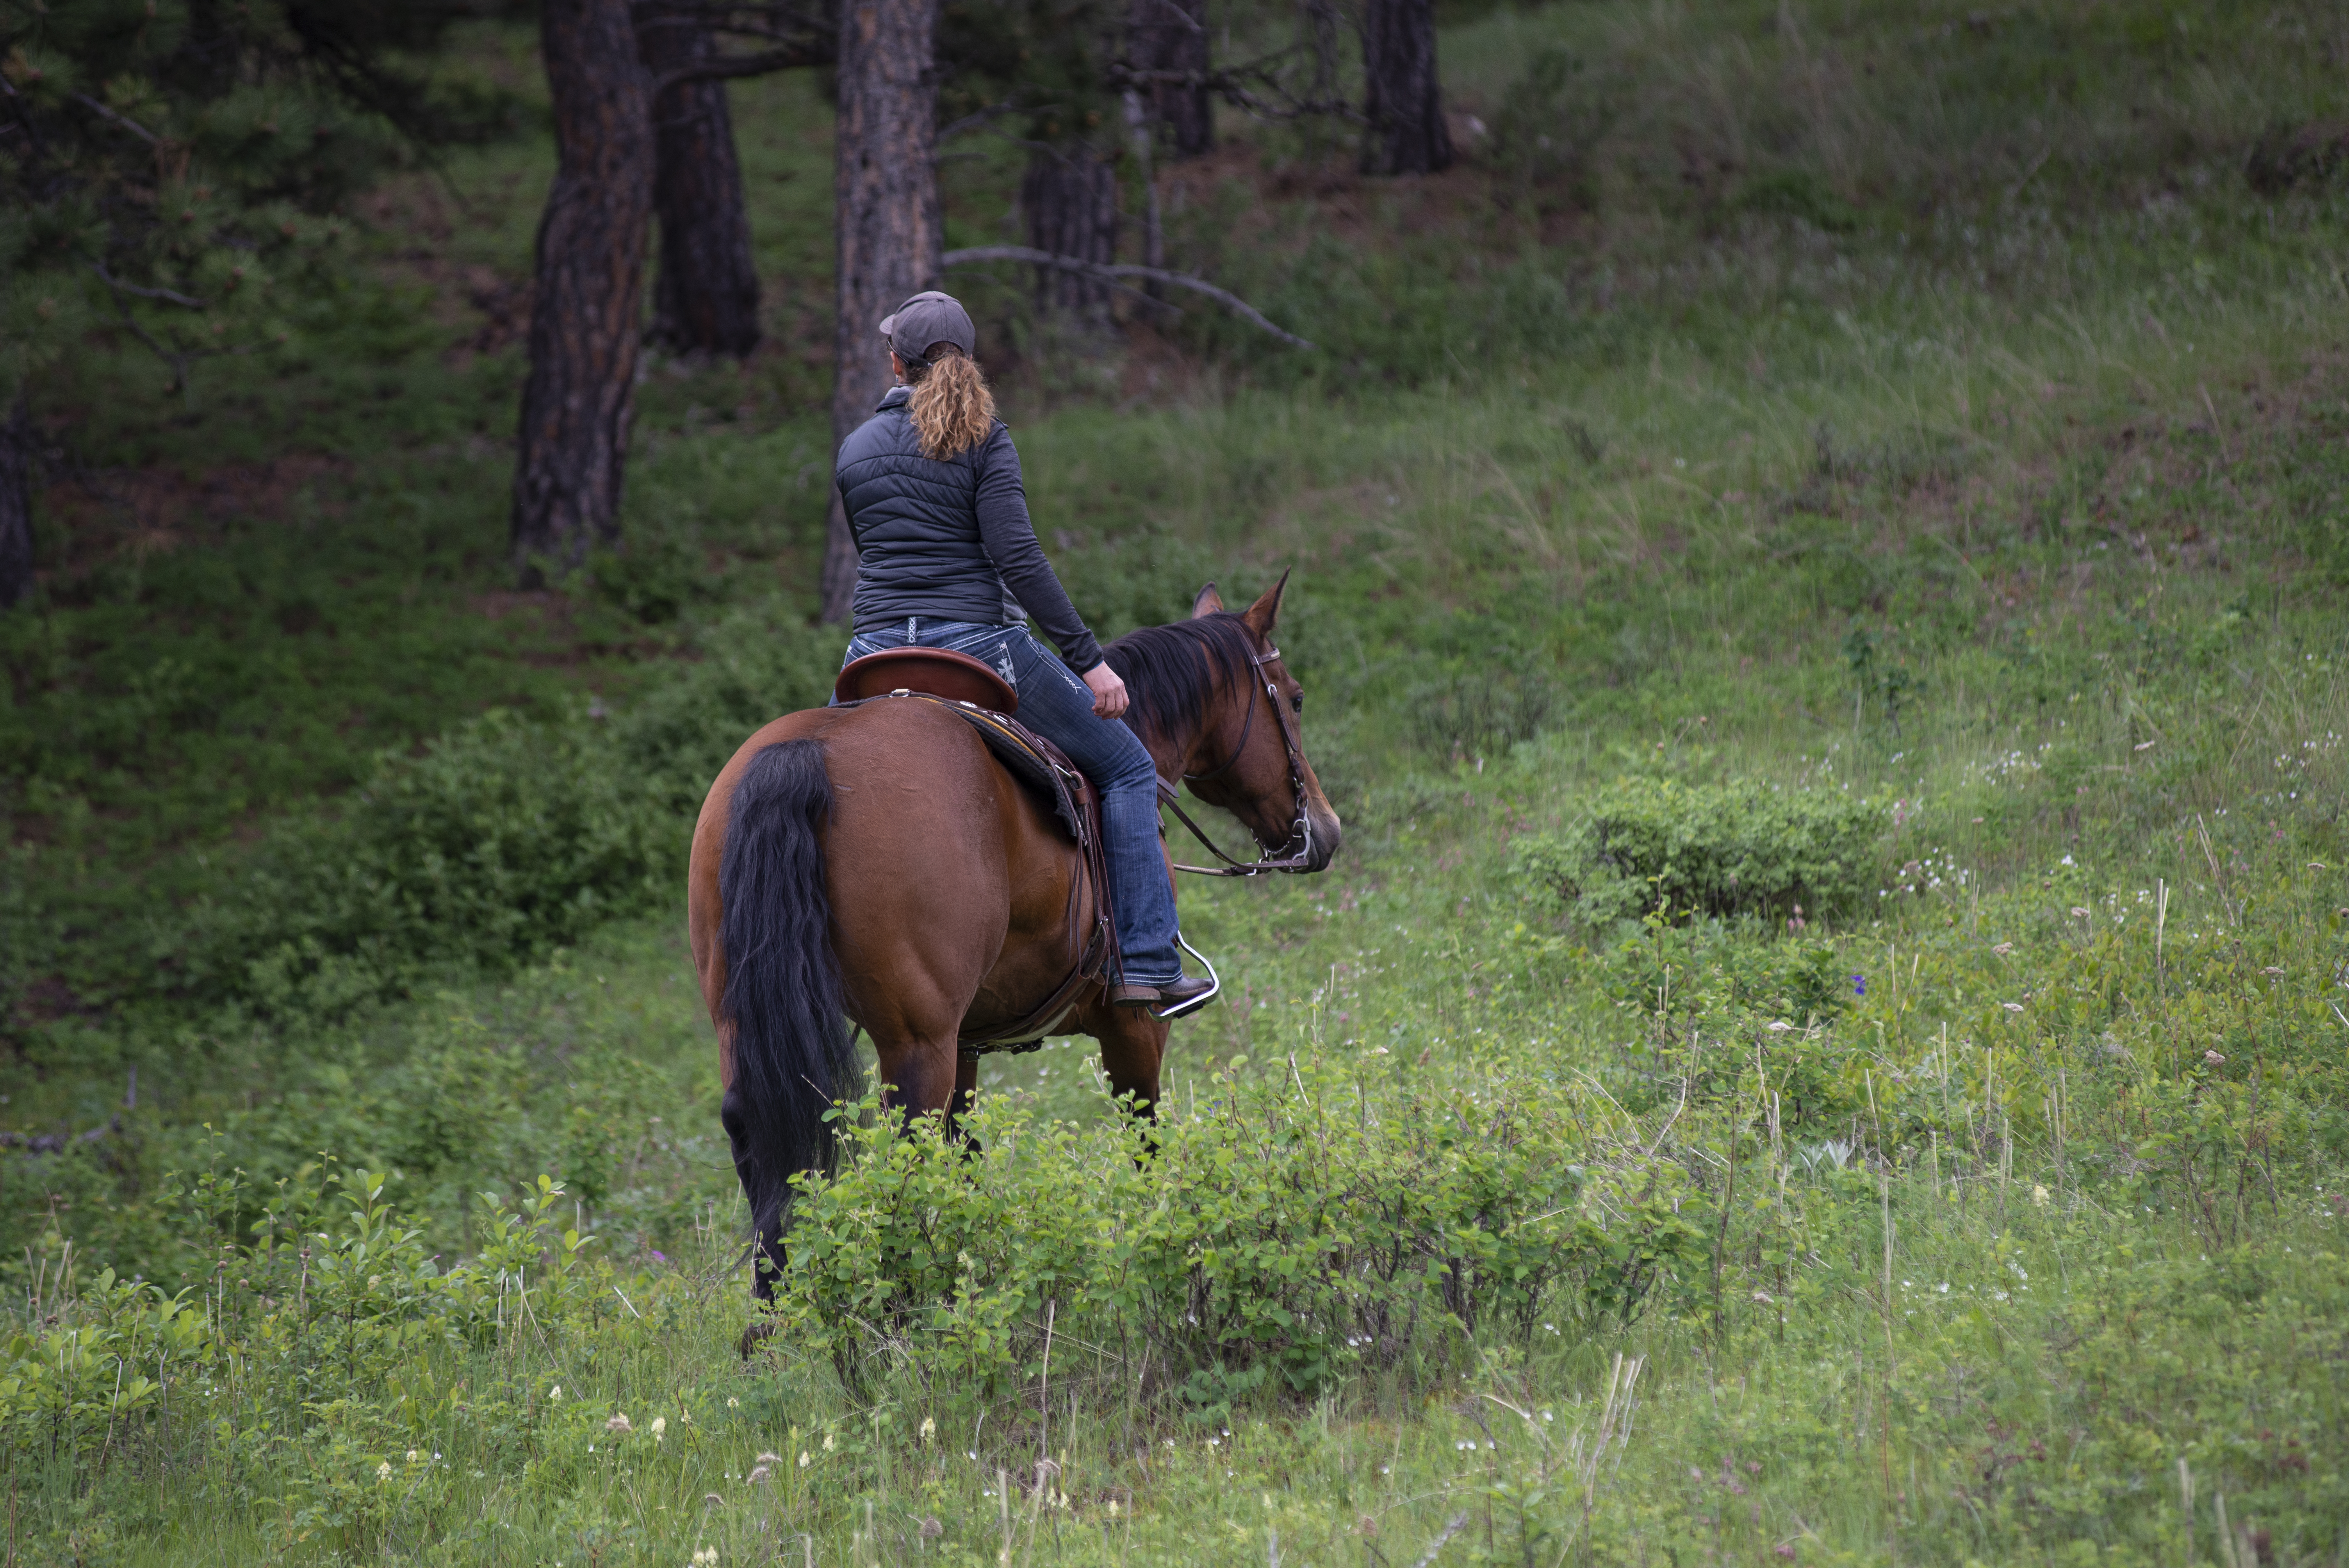 A horse and rider in the woods.
